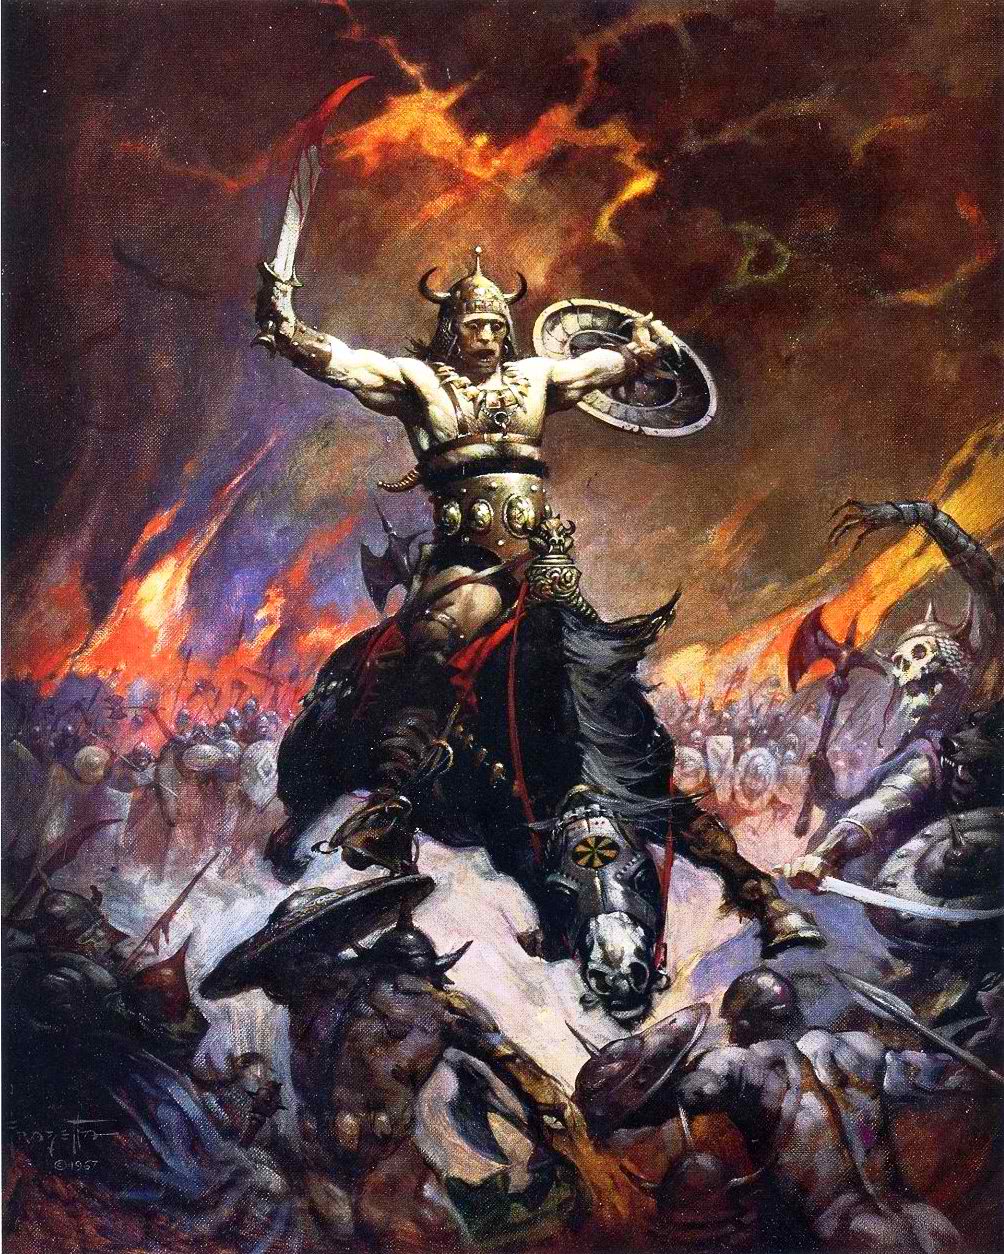 cover_art_by_frank_frazetta_used_for_the_lancer_books_conan_sphere_prestige_and_1981-1994_ace_editions_of_conan_the_conqueror